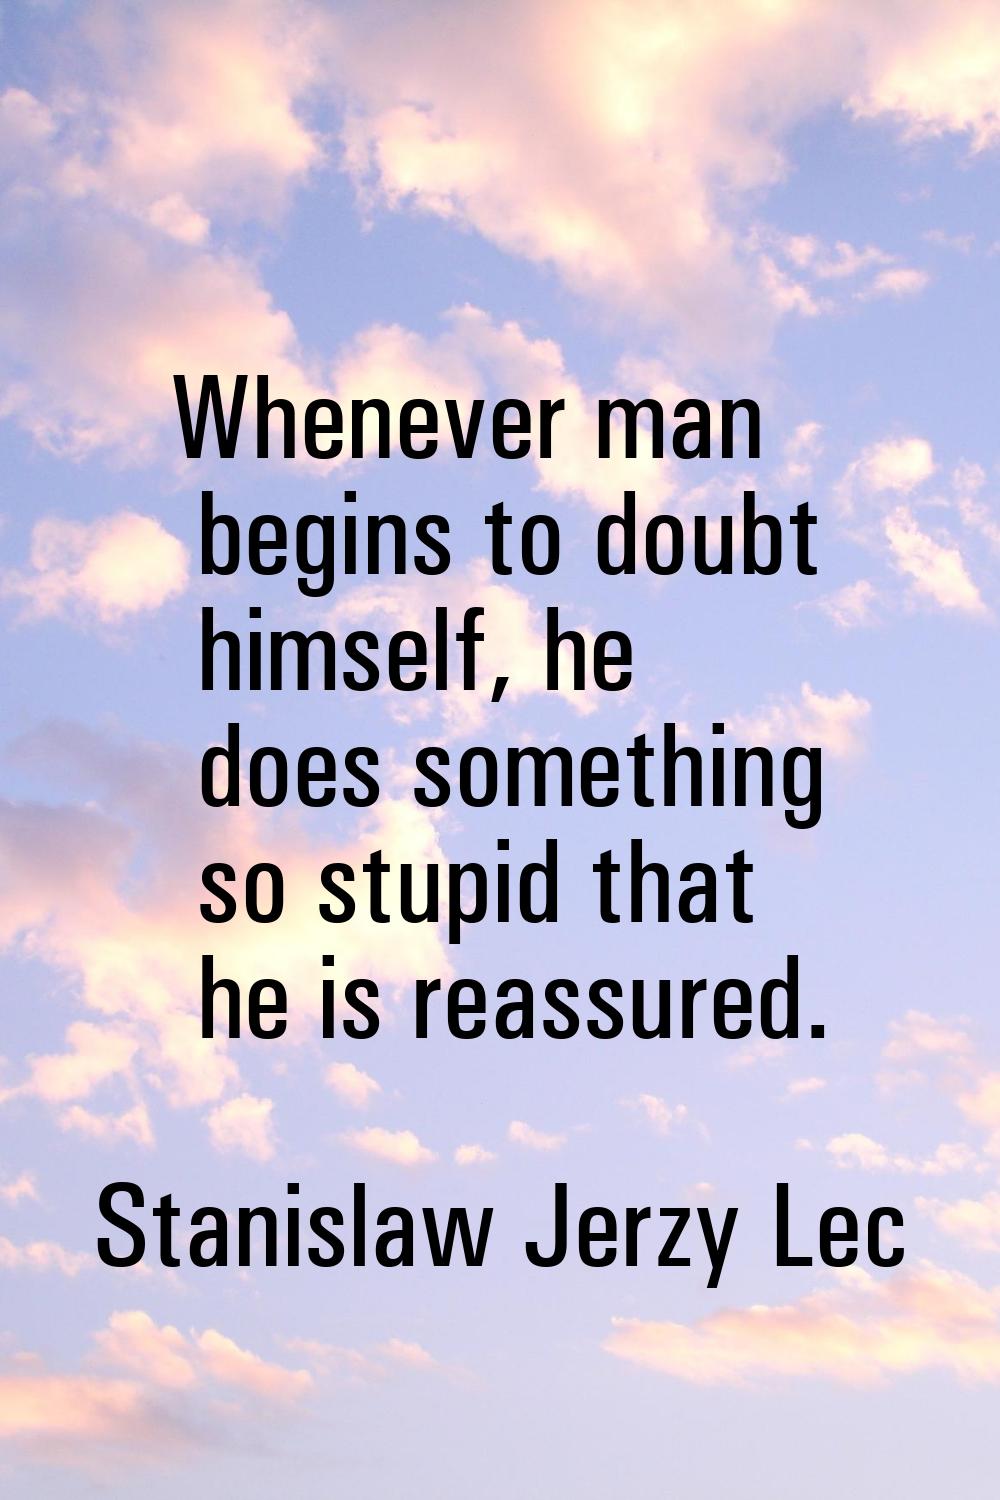 Whenever man begins to doubt himself, he does something so stupid that he is reassured.